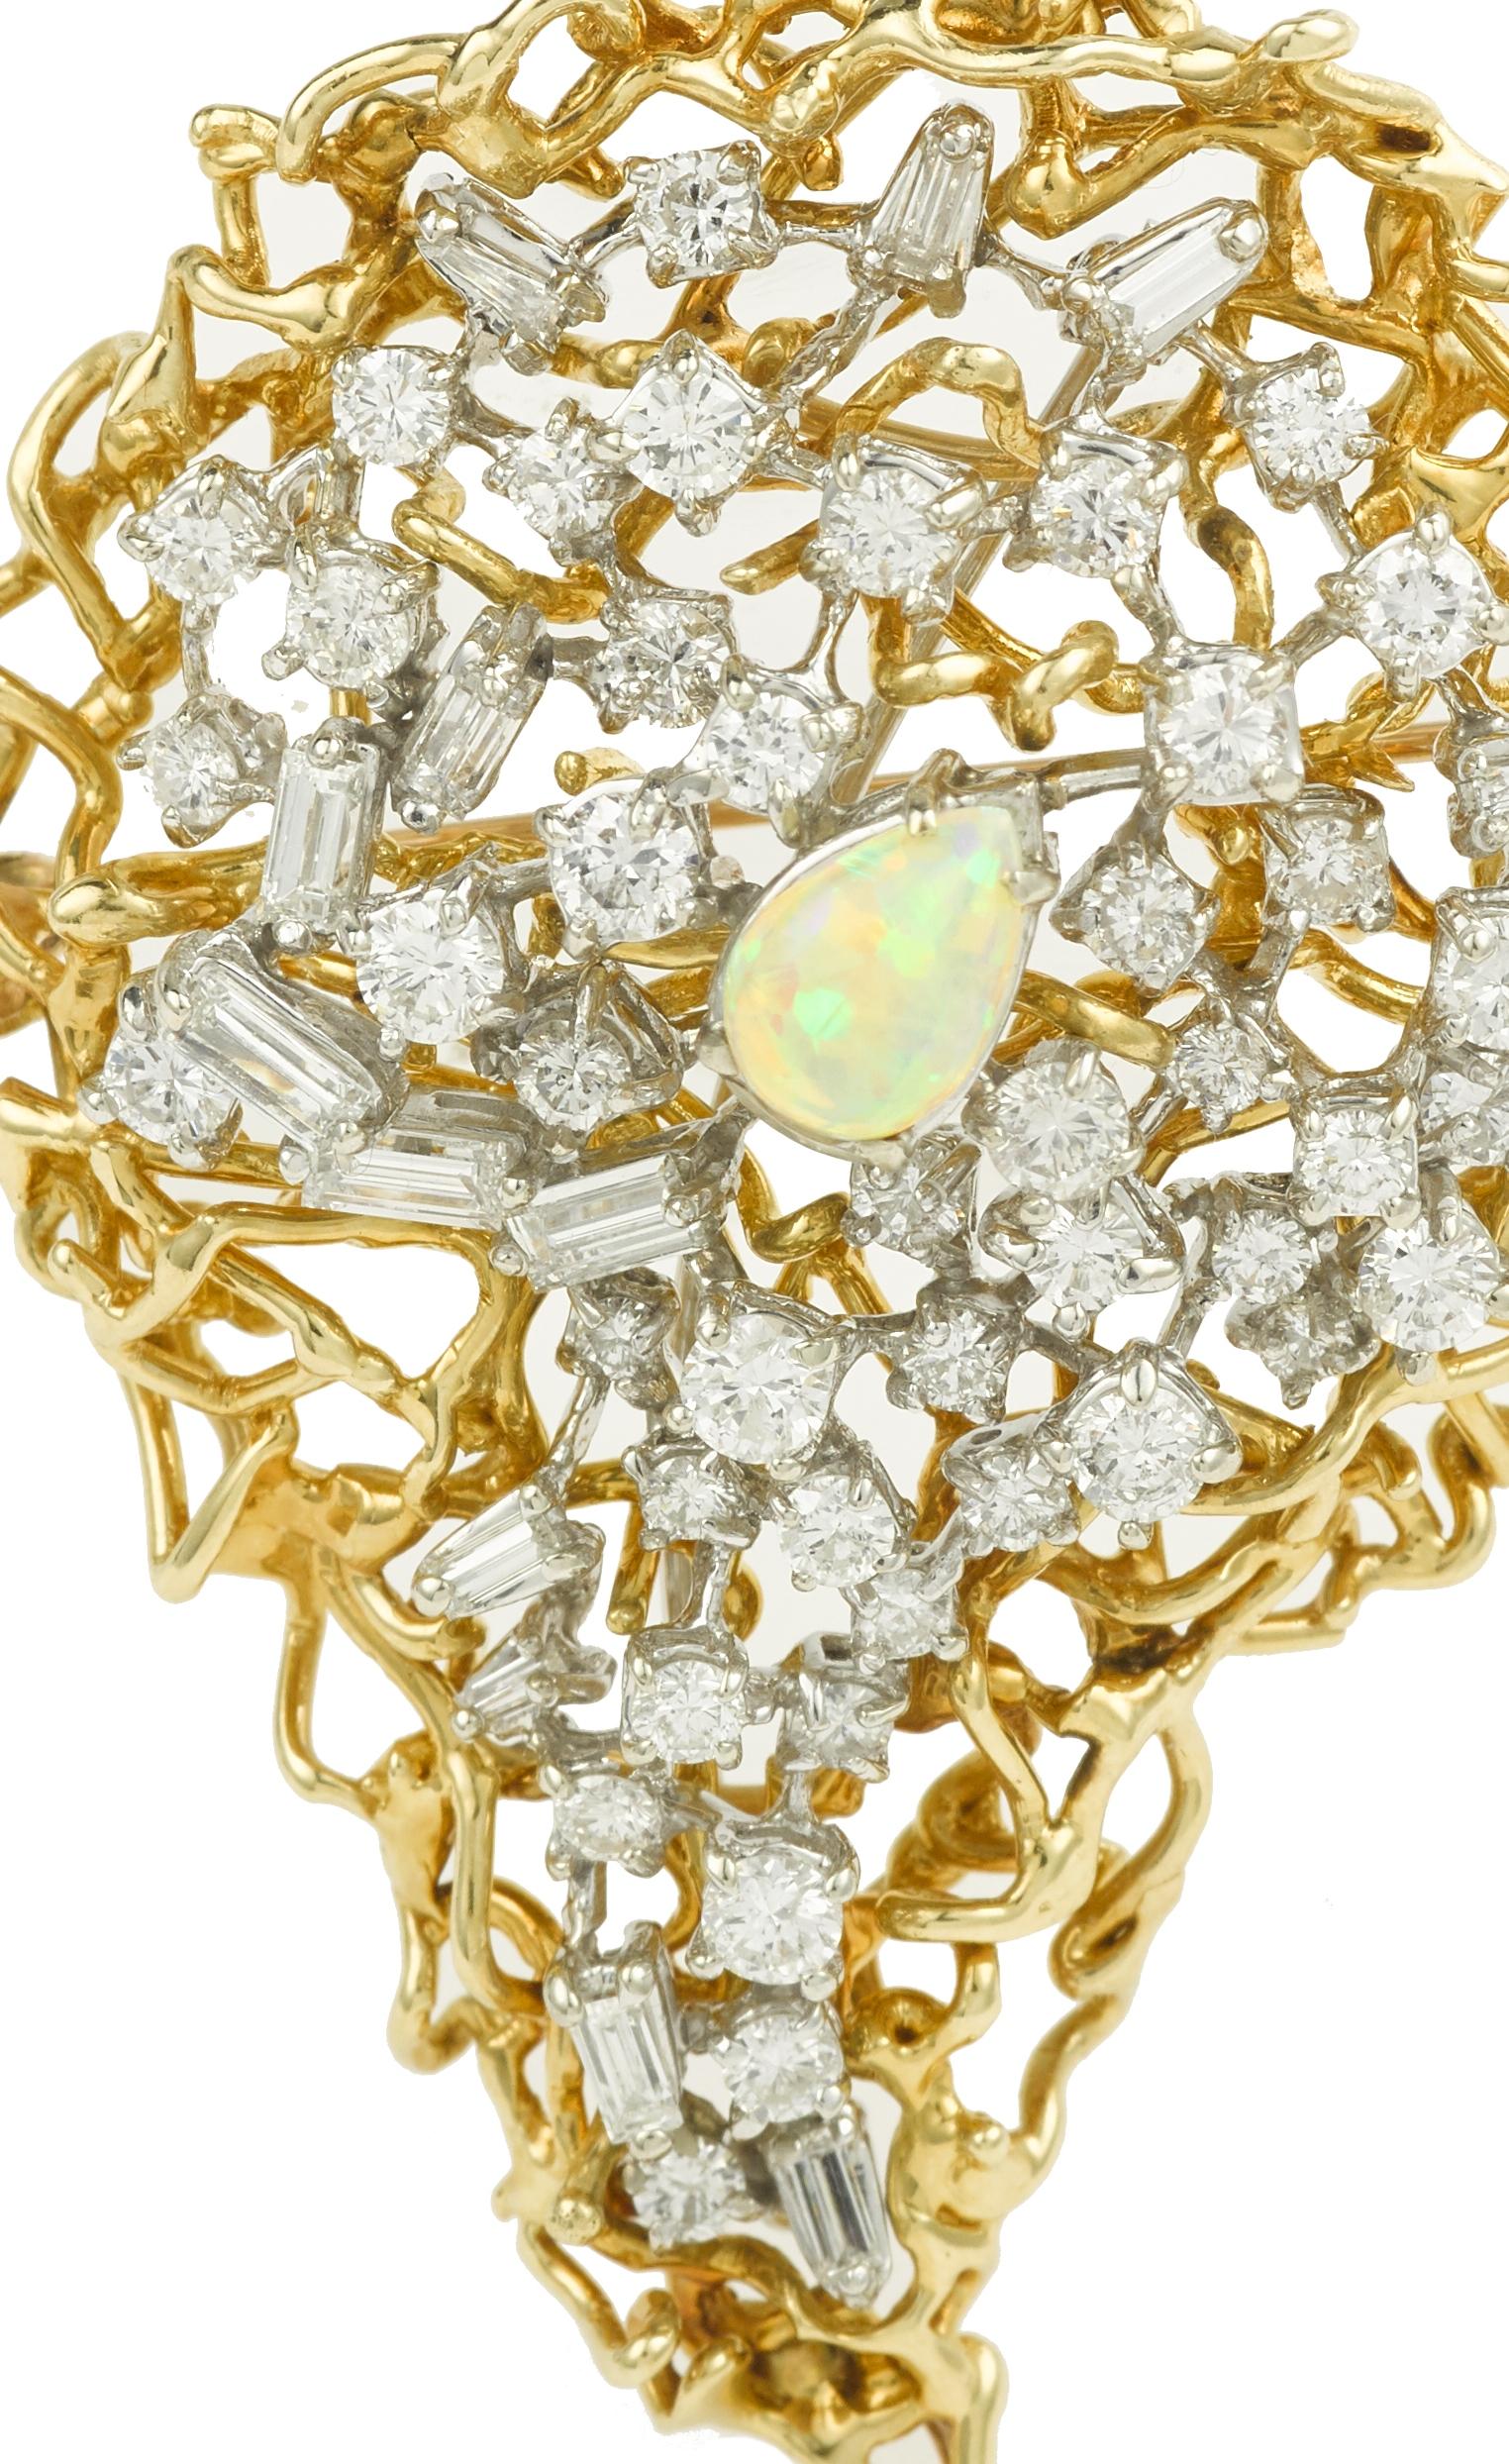 An important yellow gold brooch/pendant set with a beautiful pear-shaped opal weighing approximately 0.42 carats.

It is set with approximately 4.61 carats of baguette and brilliant cut diamonds.

Brooch size : 61 x 43 mm ( 2,402 x 1,693